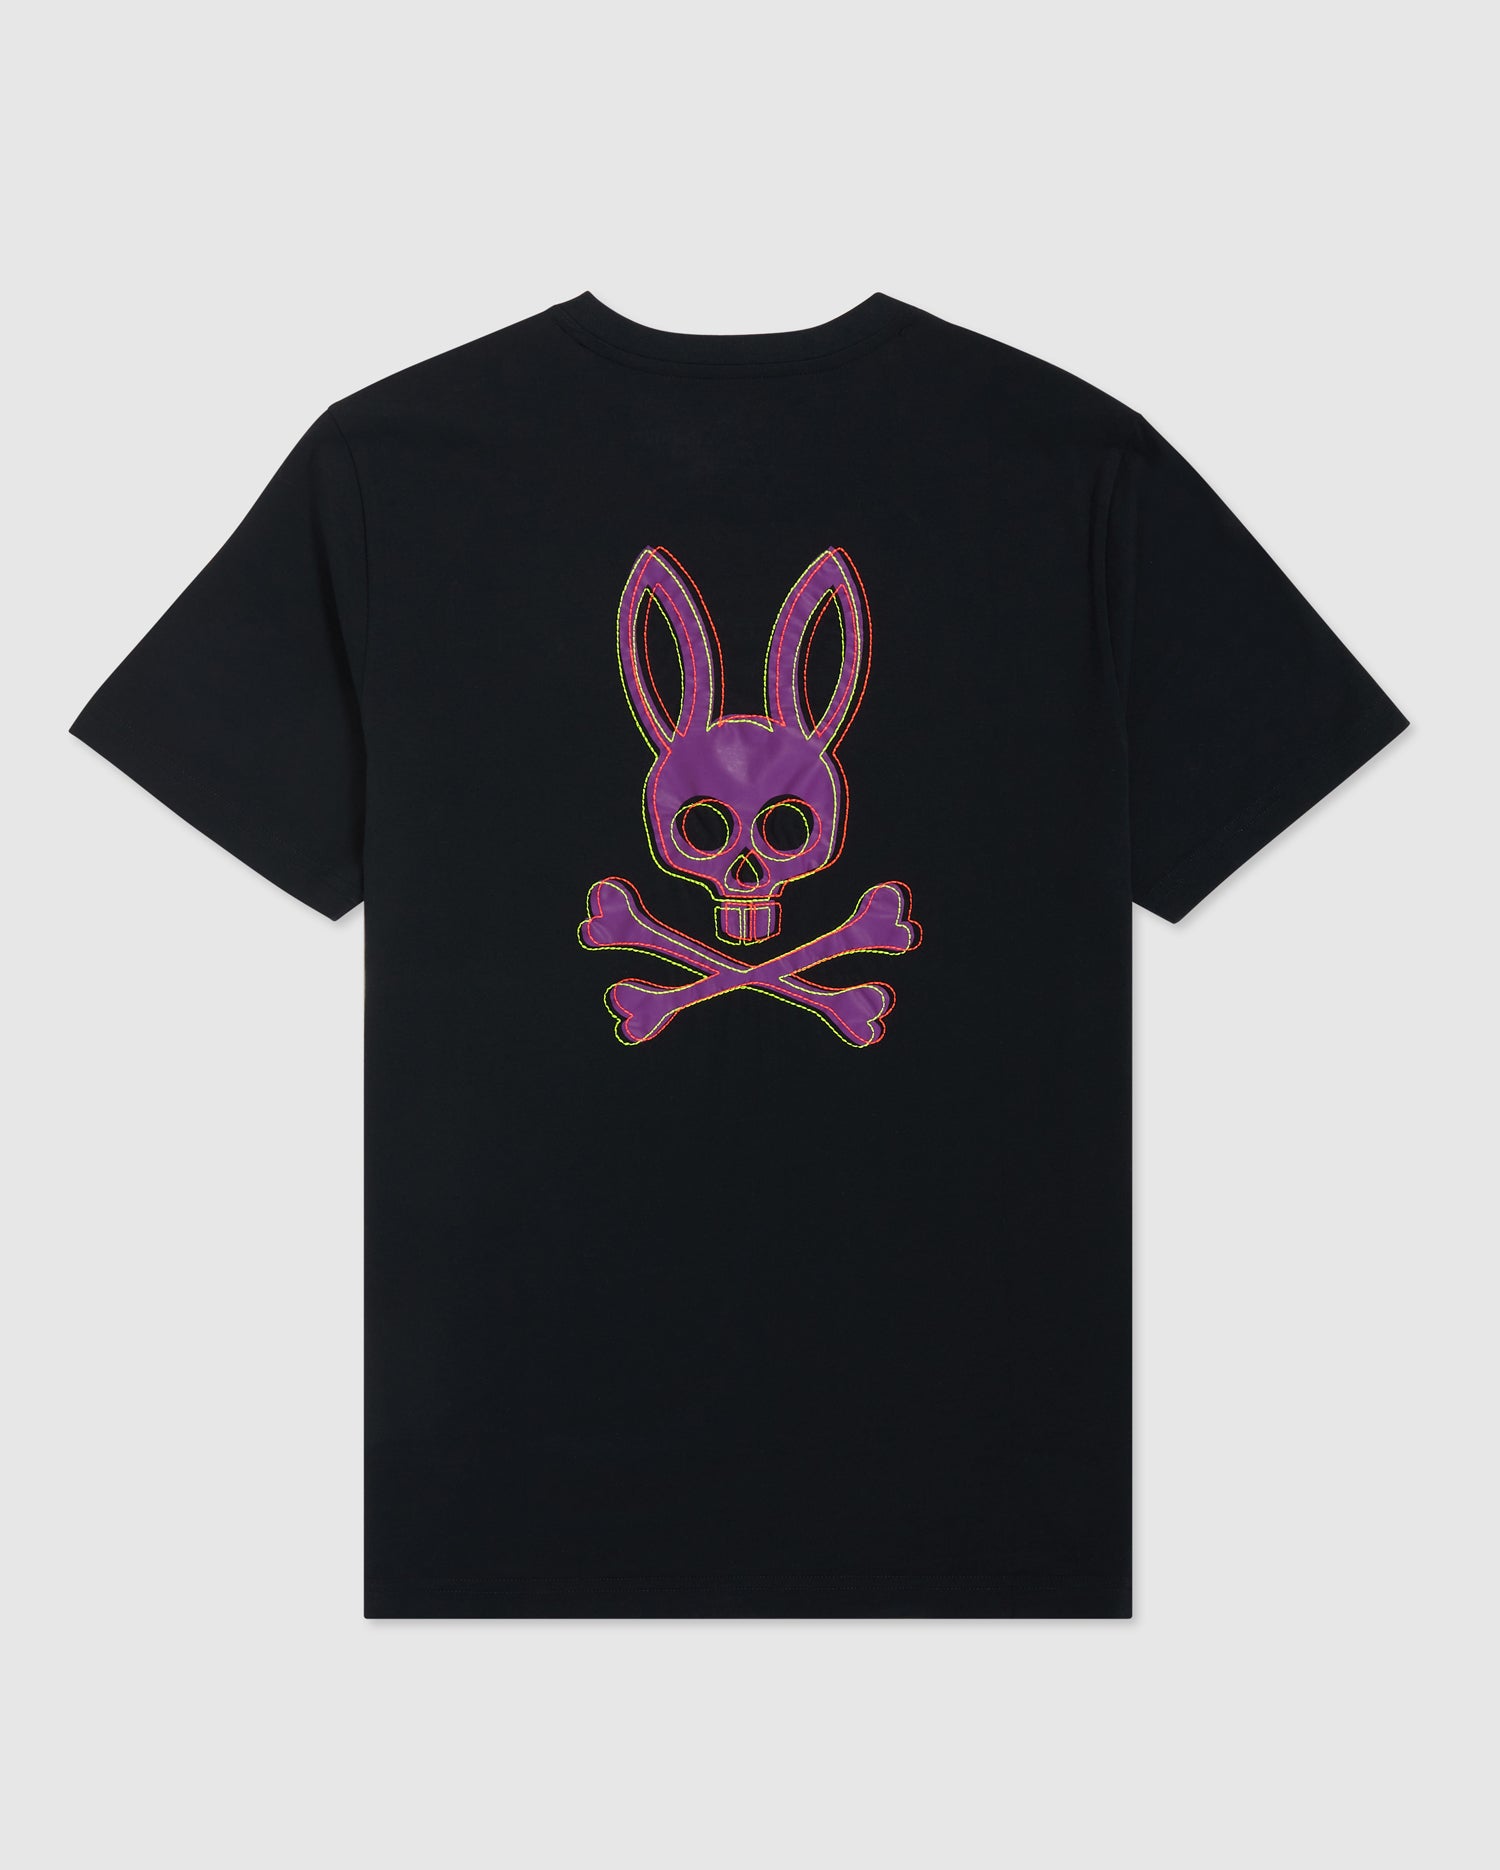 Buy Psycho Bunny Keswick Graphic Tee Shirt at In Style – InStyle